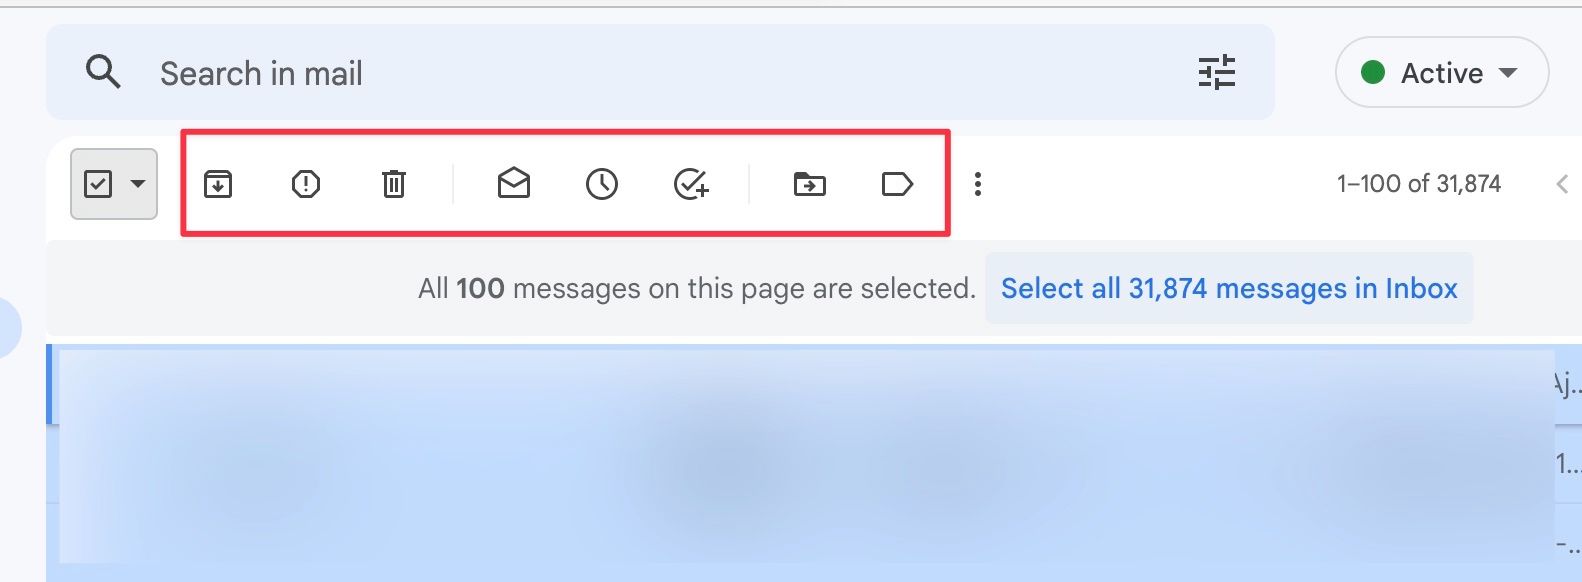 gmail actions